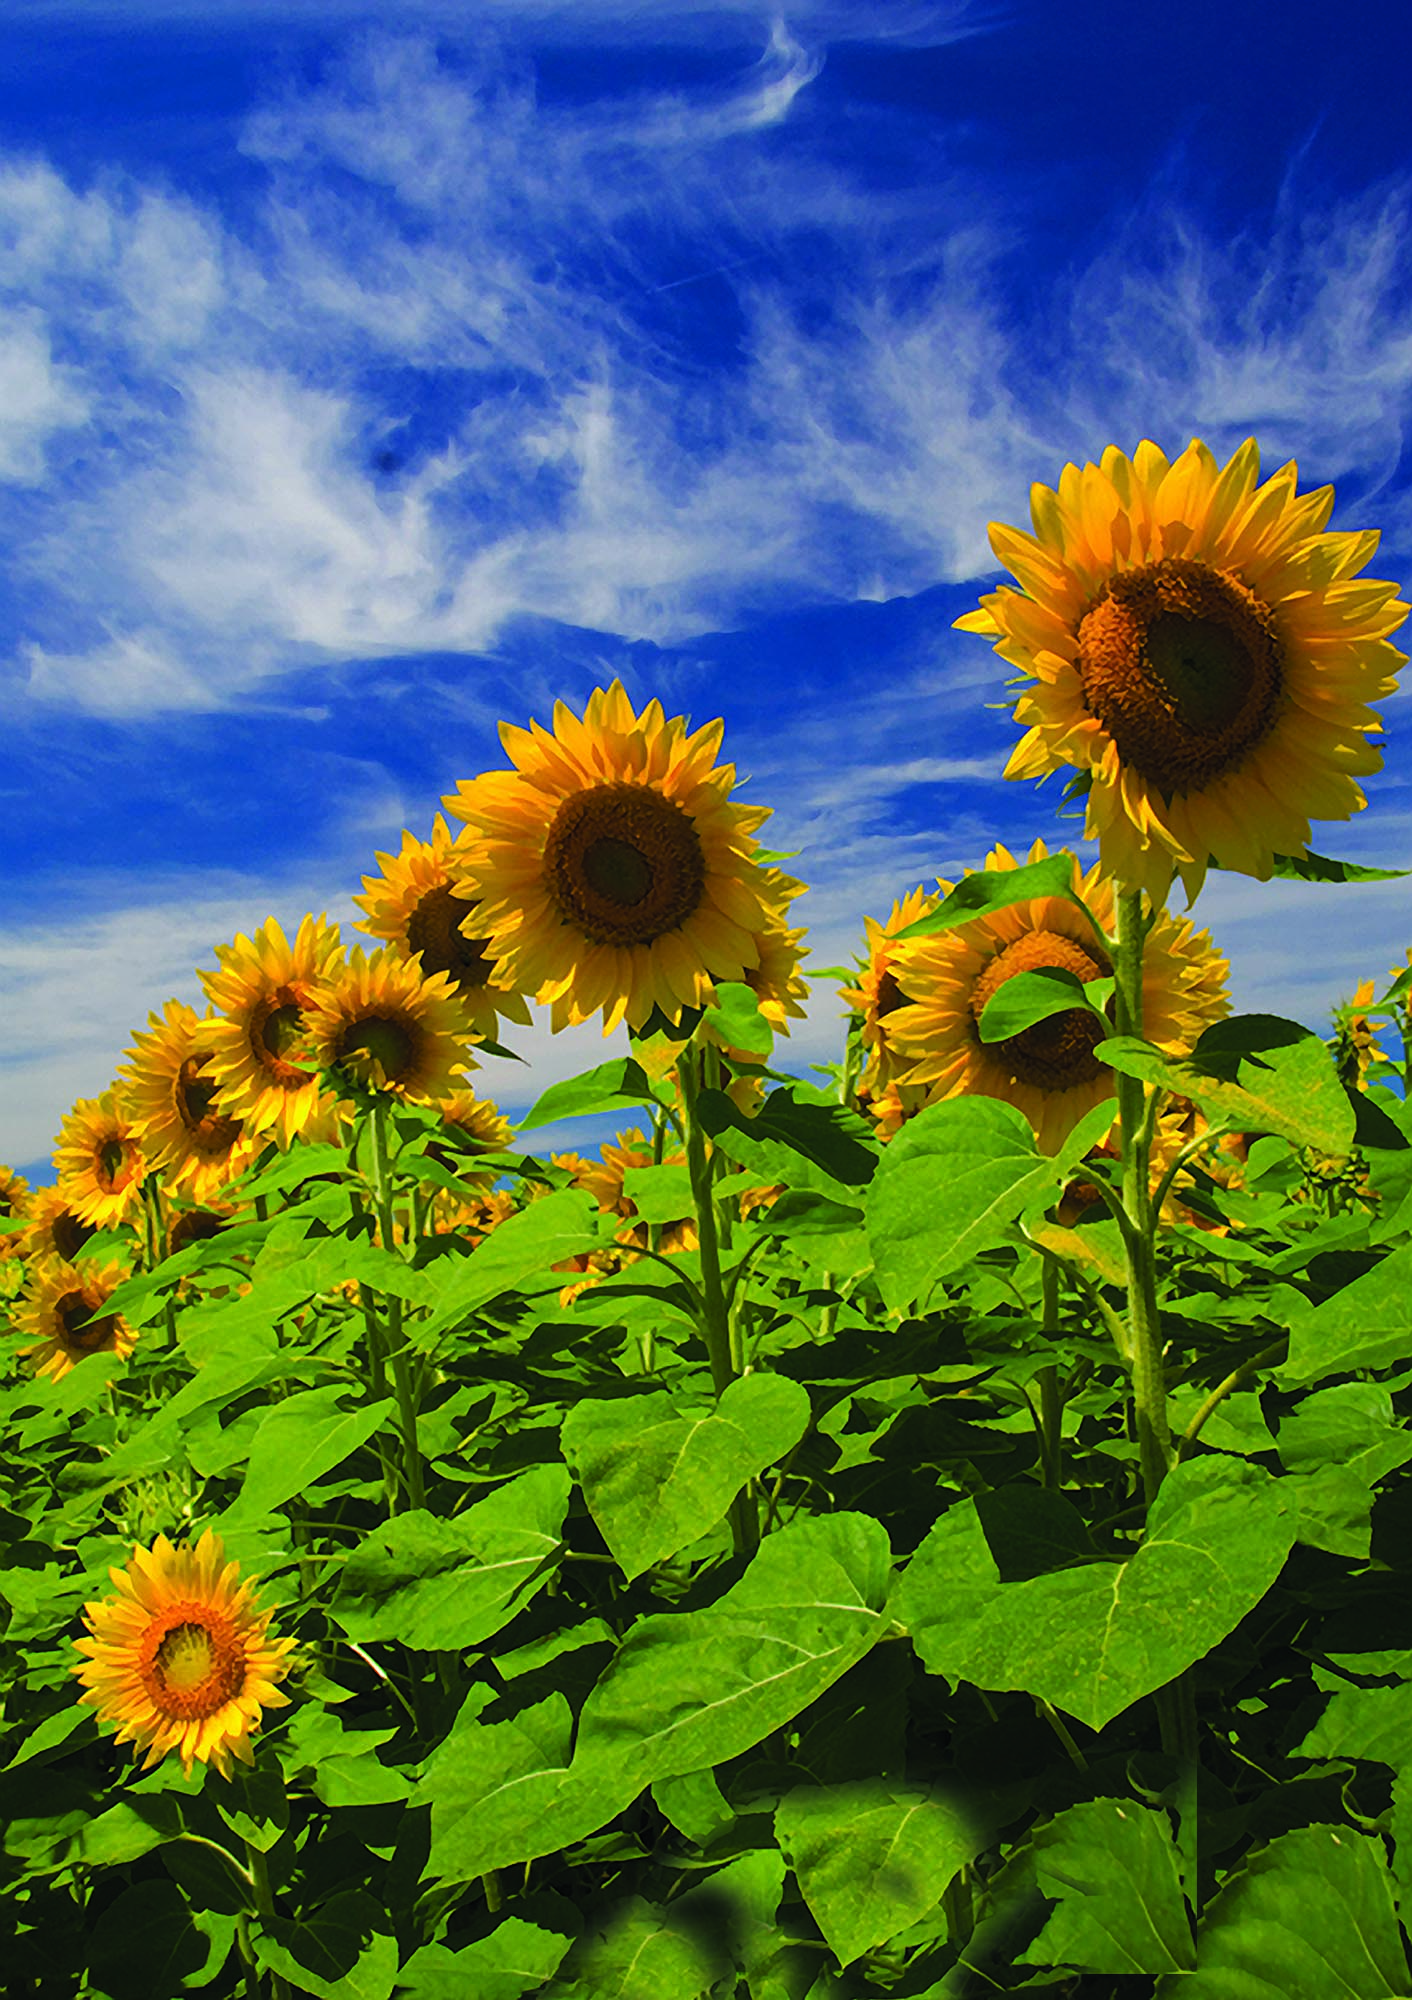 Row of sunflowers with blue sky with clouds